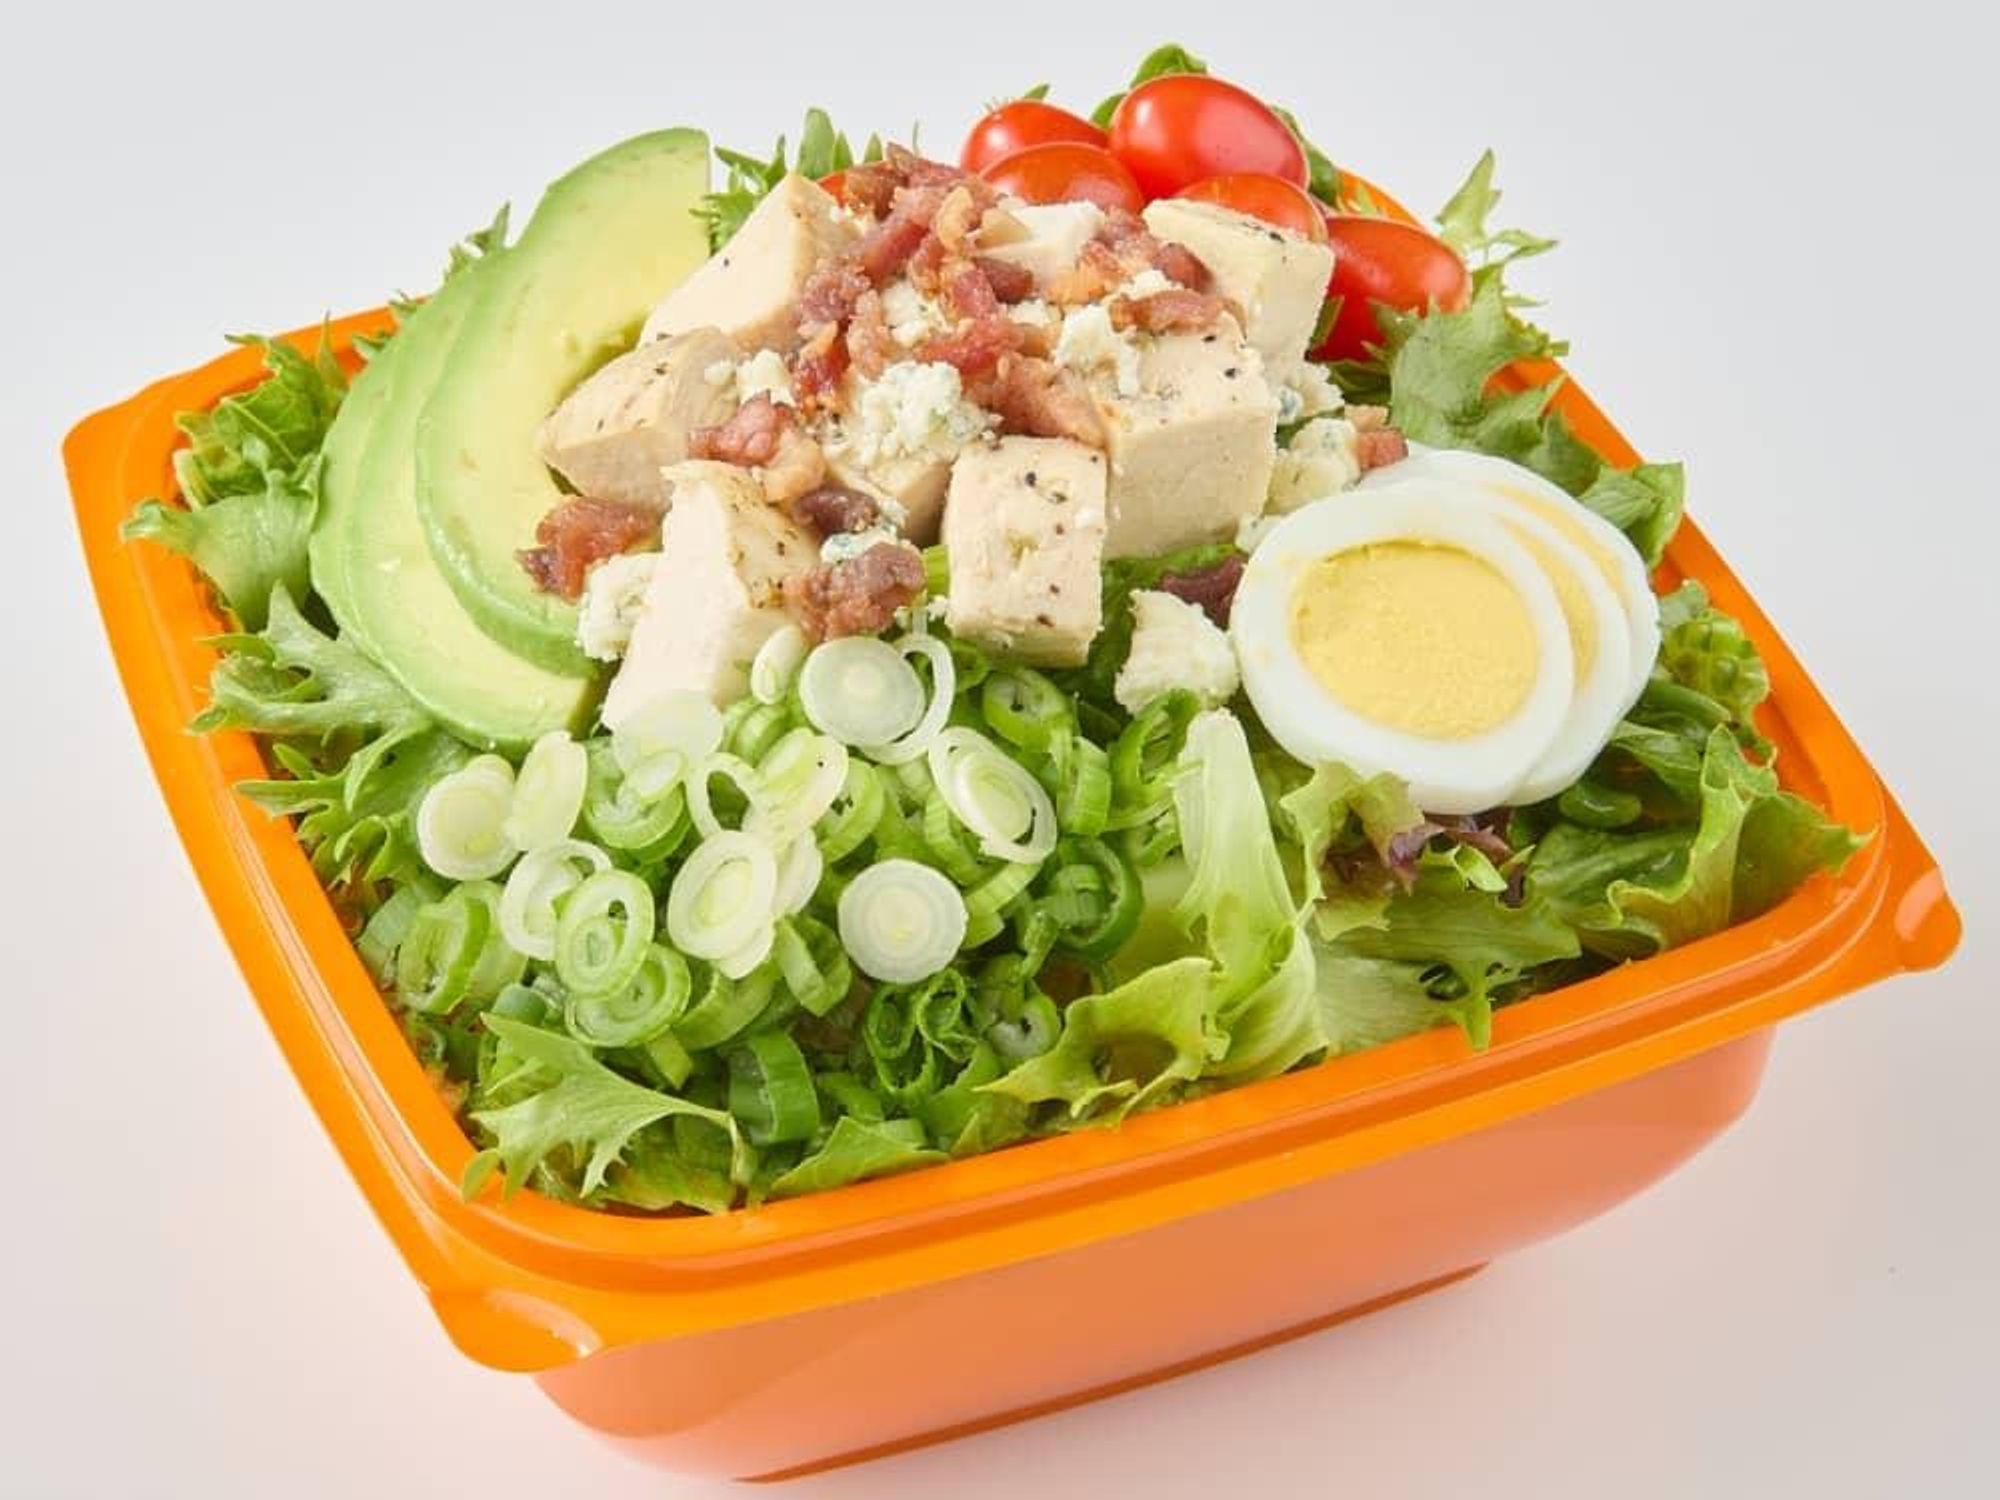 Salad and Go keeps the salads coming with new drive-thru in